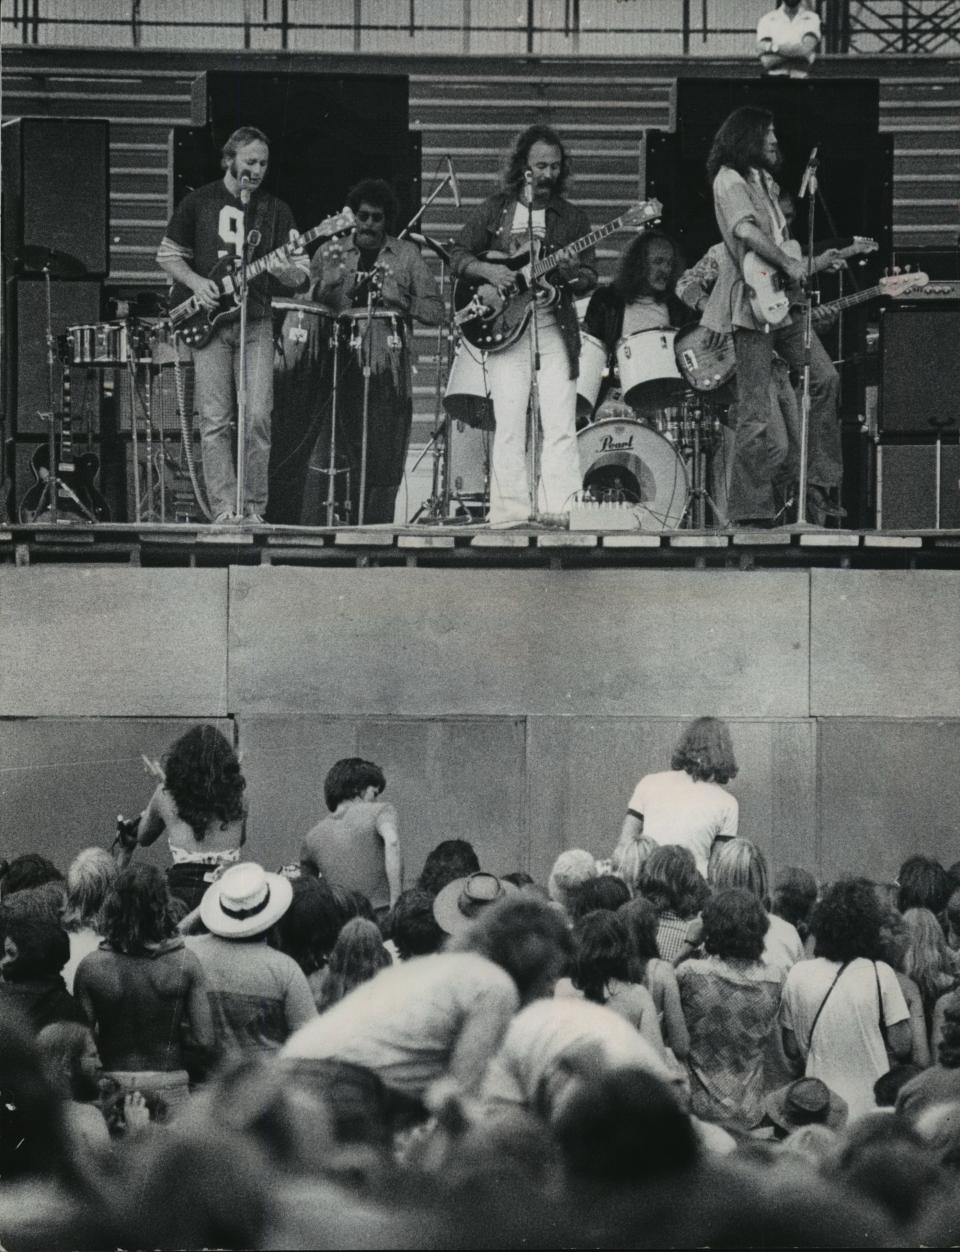 Crosby, Stills, Nash & Young take the stage at County Stadium before about 52,000 people on July 21, 1974.